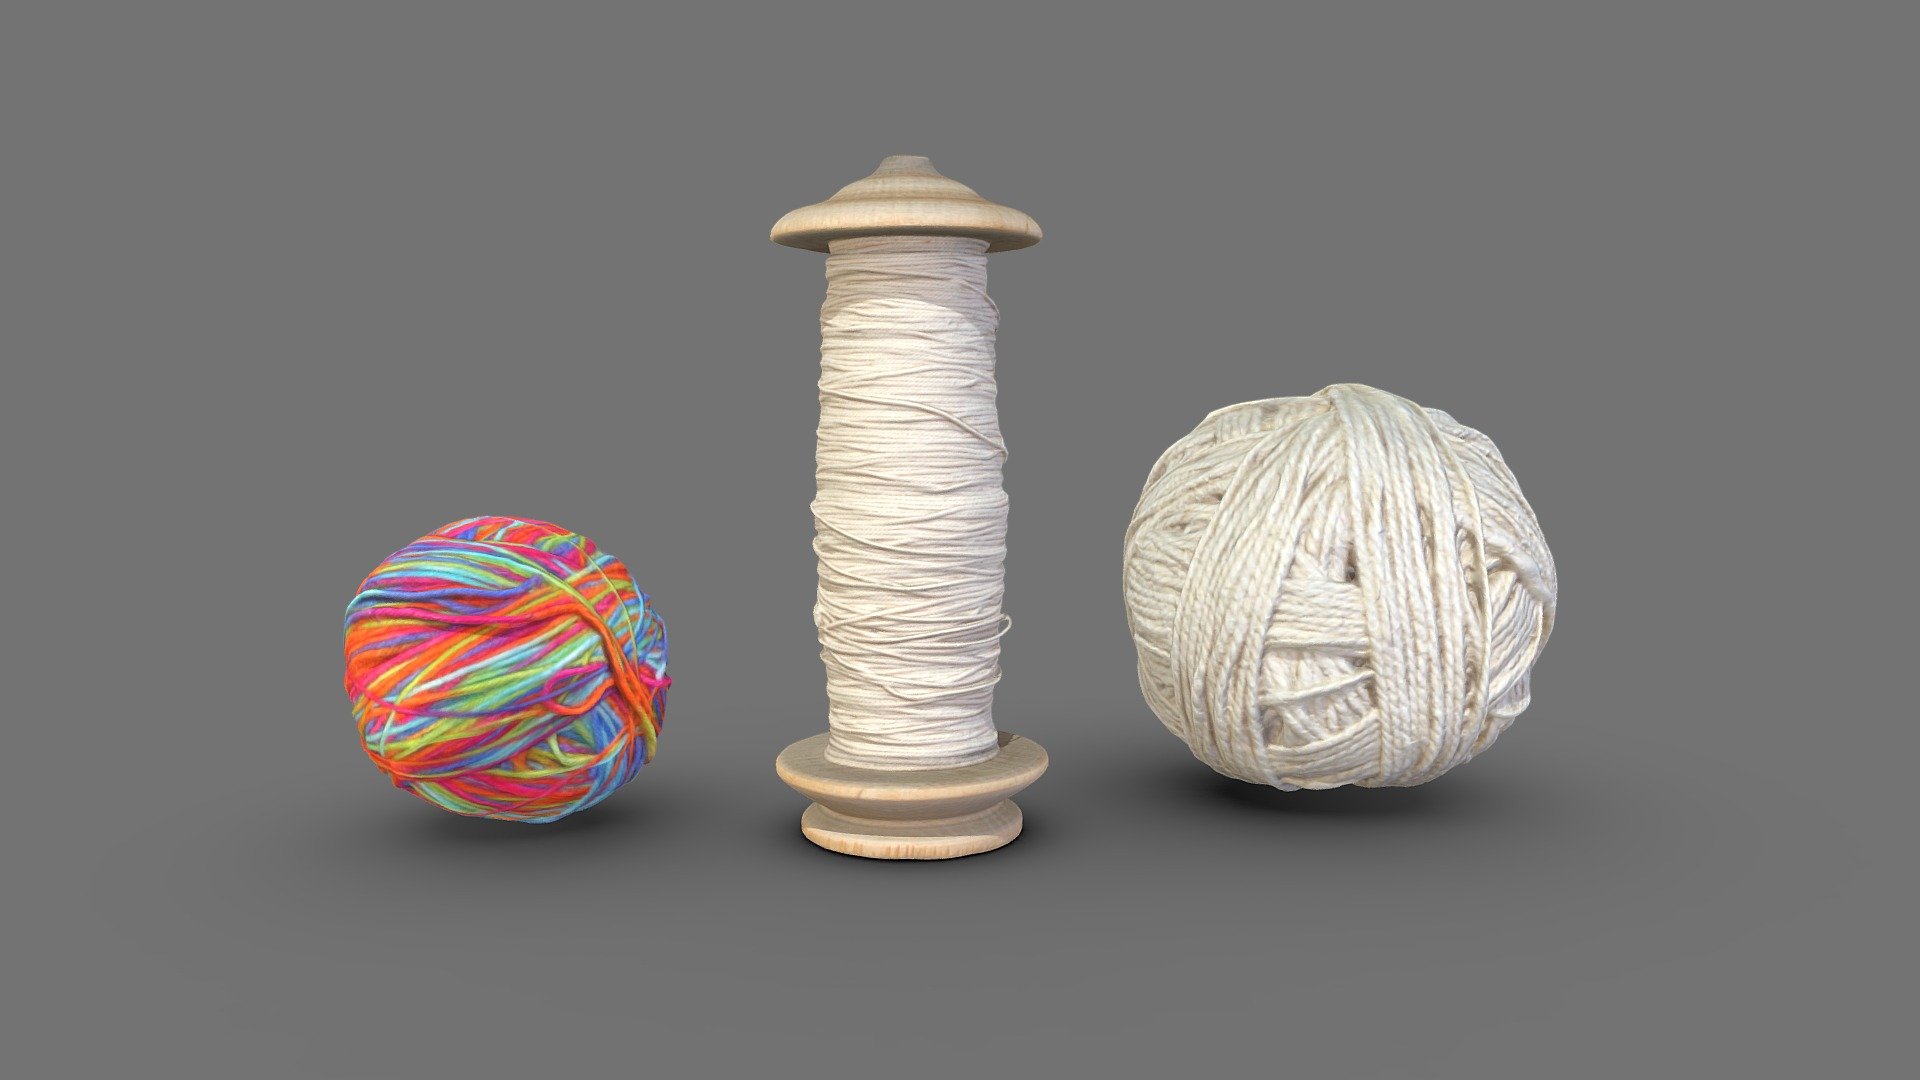 Quad remeshed string and balls.

Model includes 8k diffuse map, 4k normal map, 4k ambient occlusion map for every object.

Photos taken with A7Riv + 90mm Sony and D5300 + 60mm and 35mm.

Processed with Metashape + Blender - Spool of string and balls of yarn - Buy Royalty Free 3D model by Lassi Kaukonen (@thesidekick) 3d model